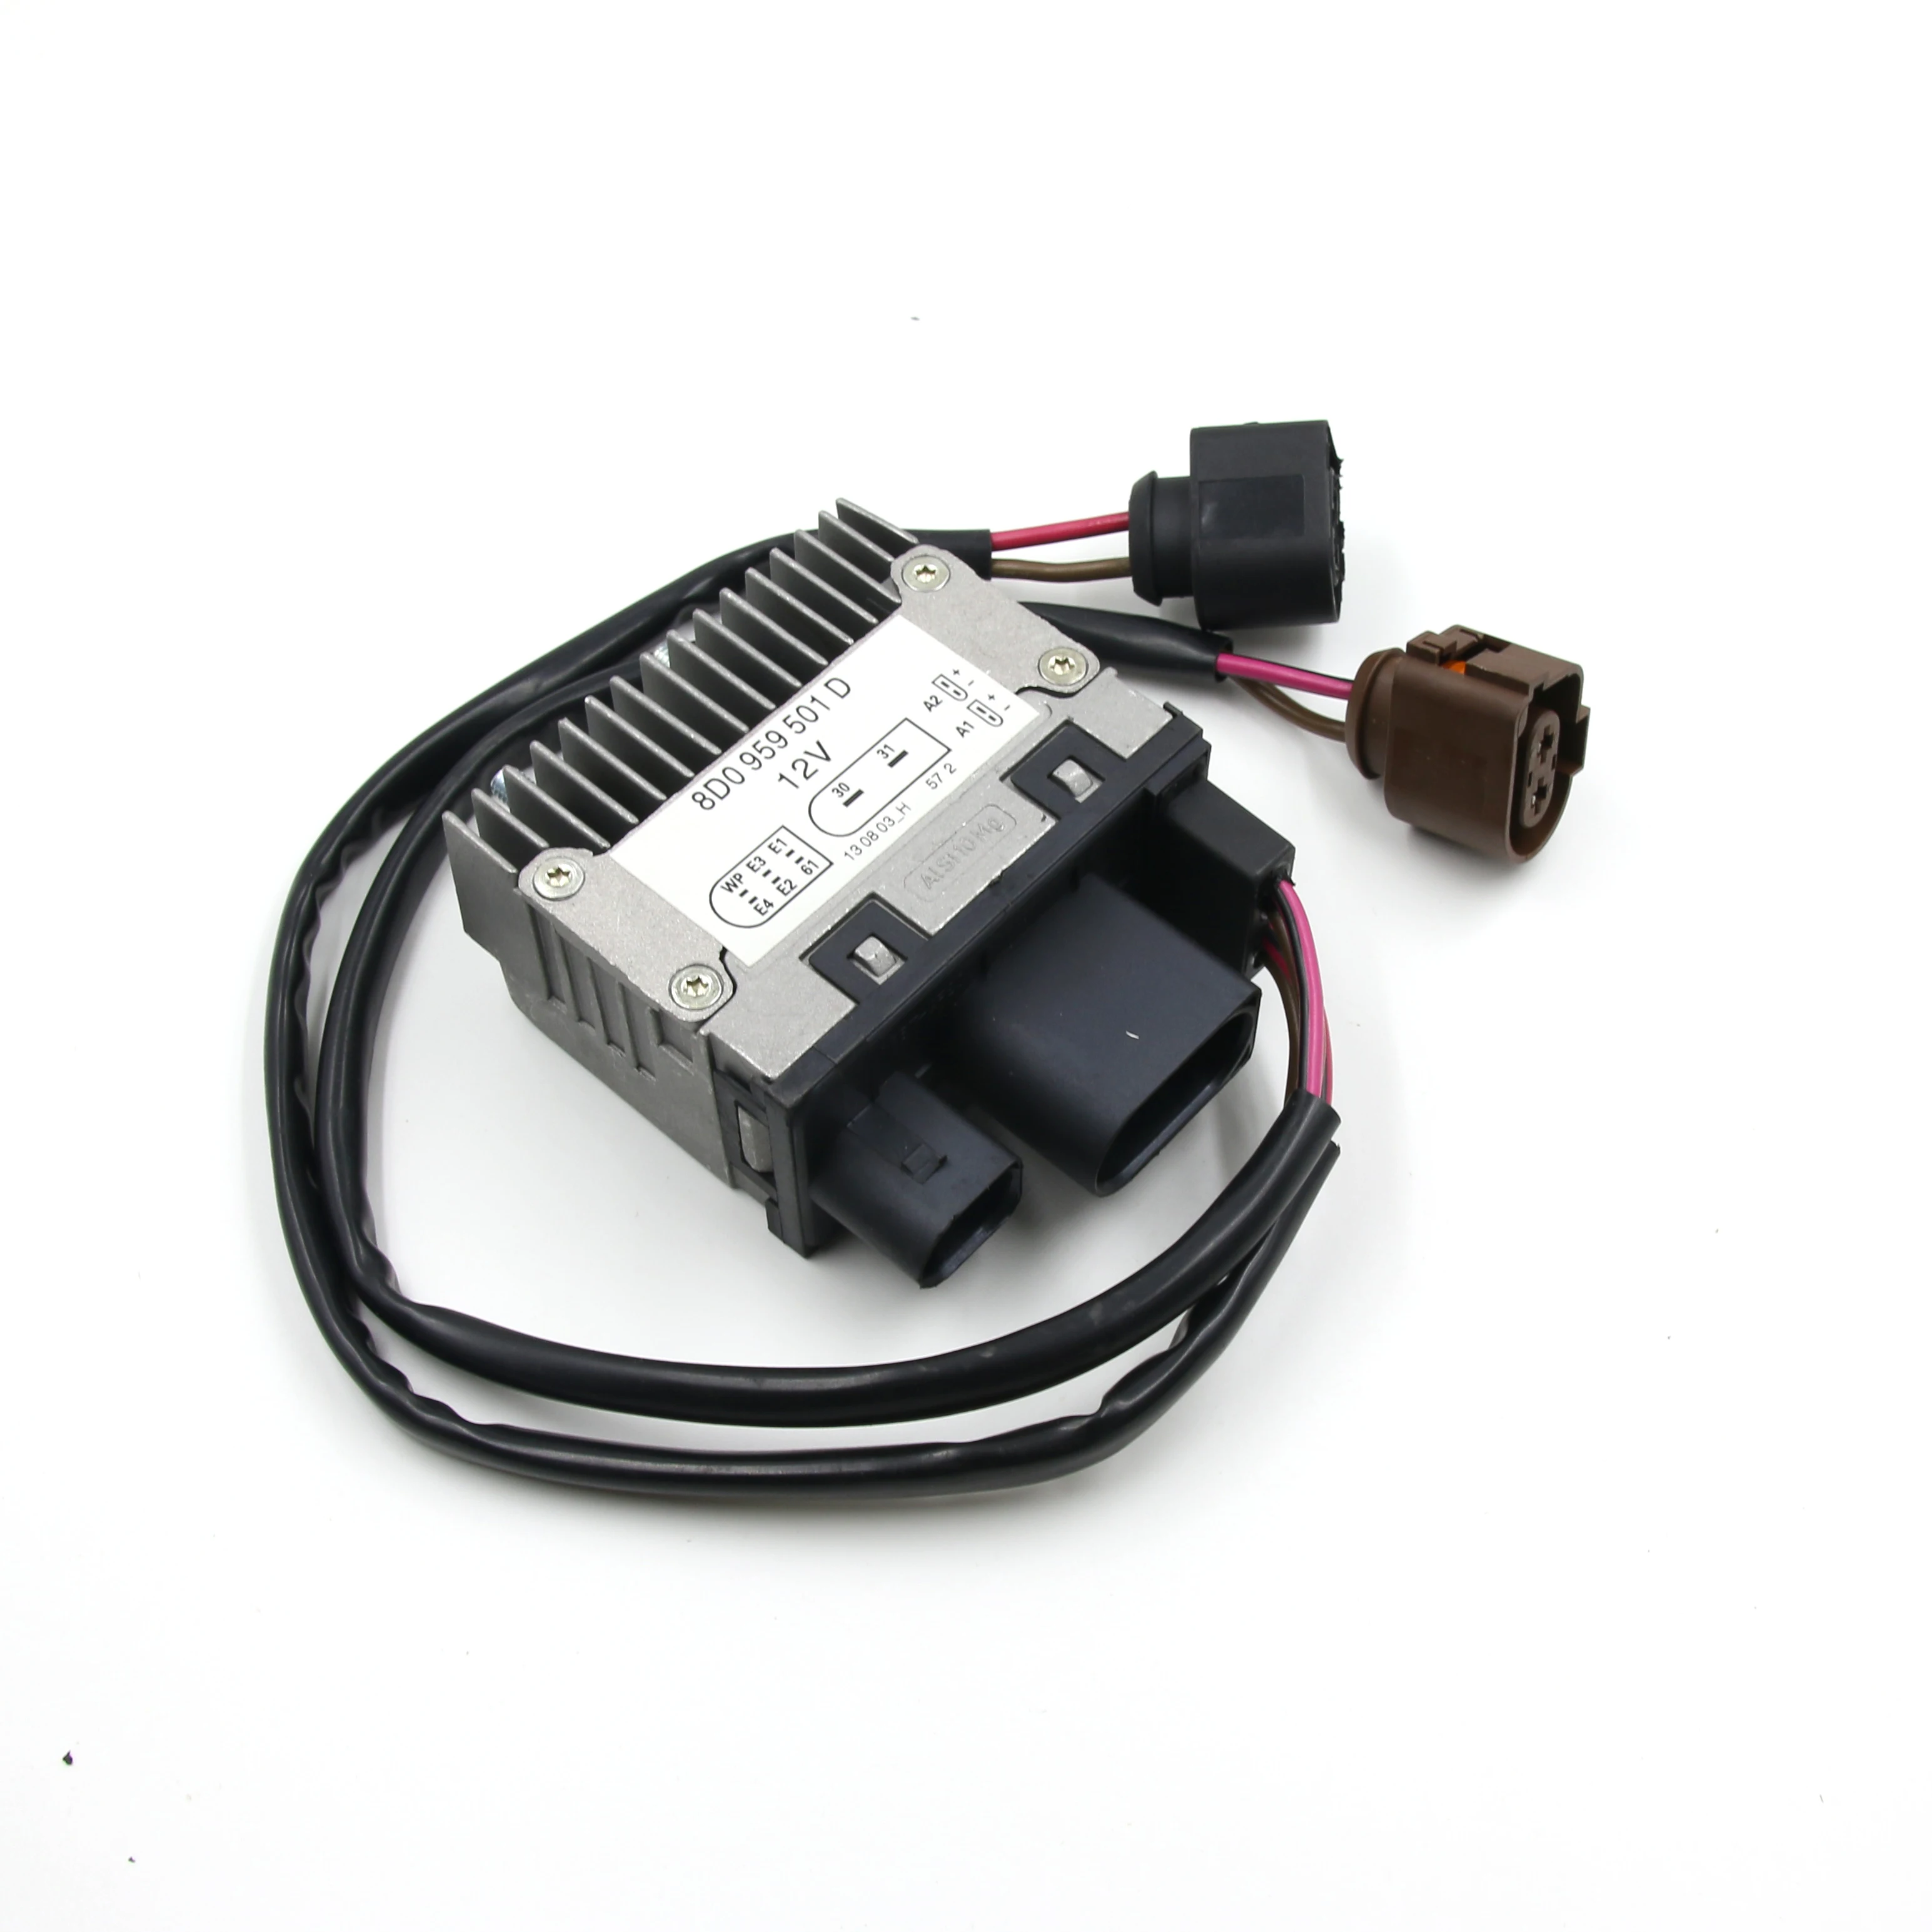 High Quality! Fan Control Unit Relay Module Fit For AUDI A4 A6 S4 Allroad - Brand New 8D0 959 501 D 8D0 959 501 B